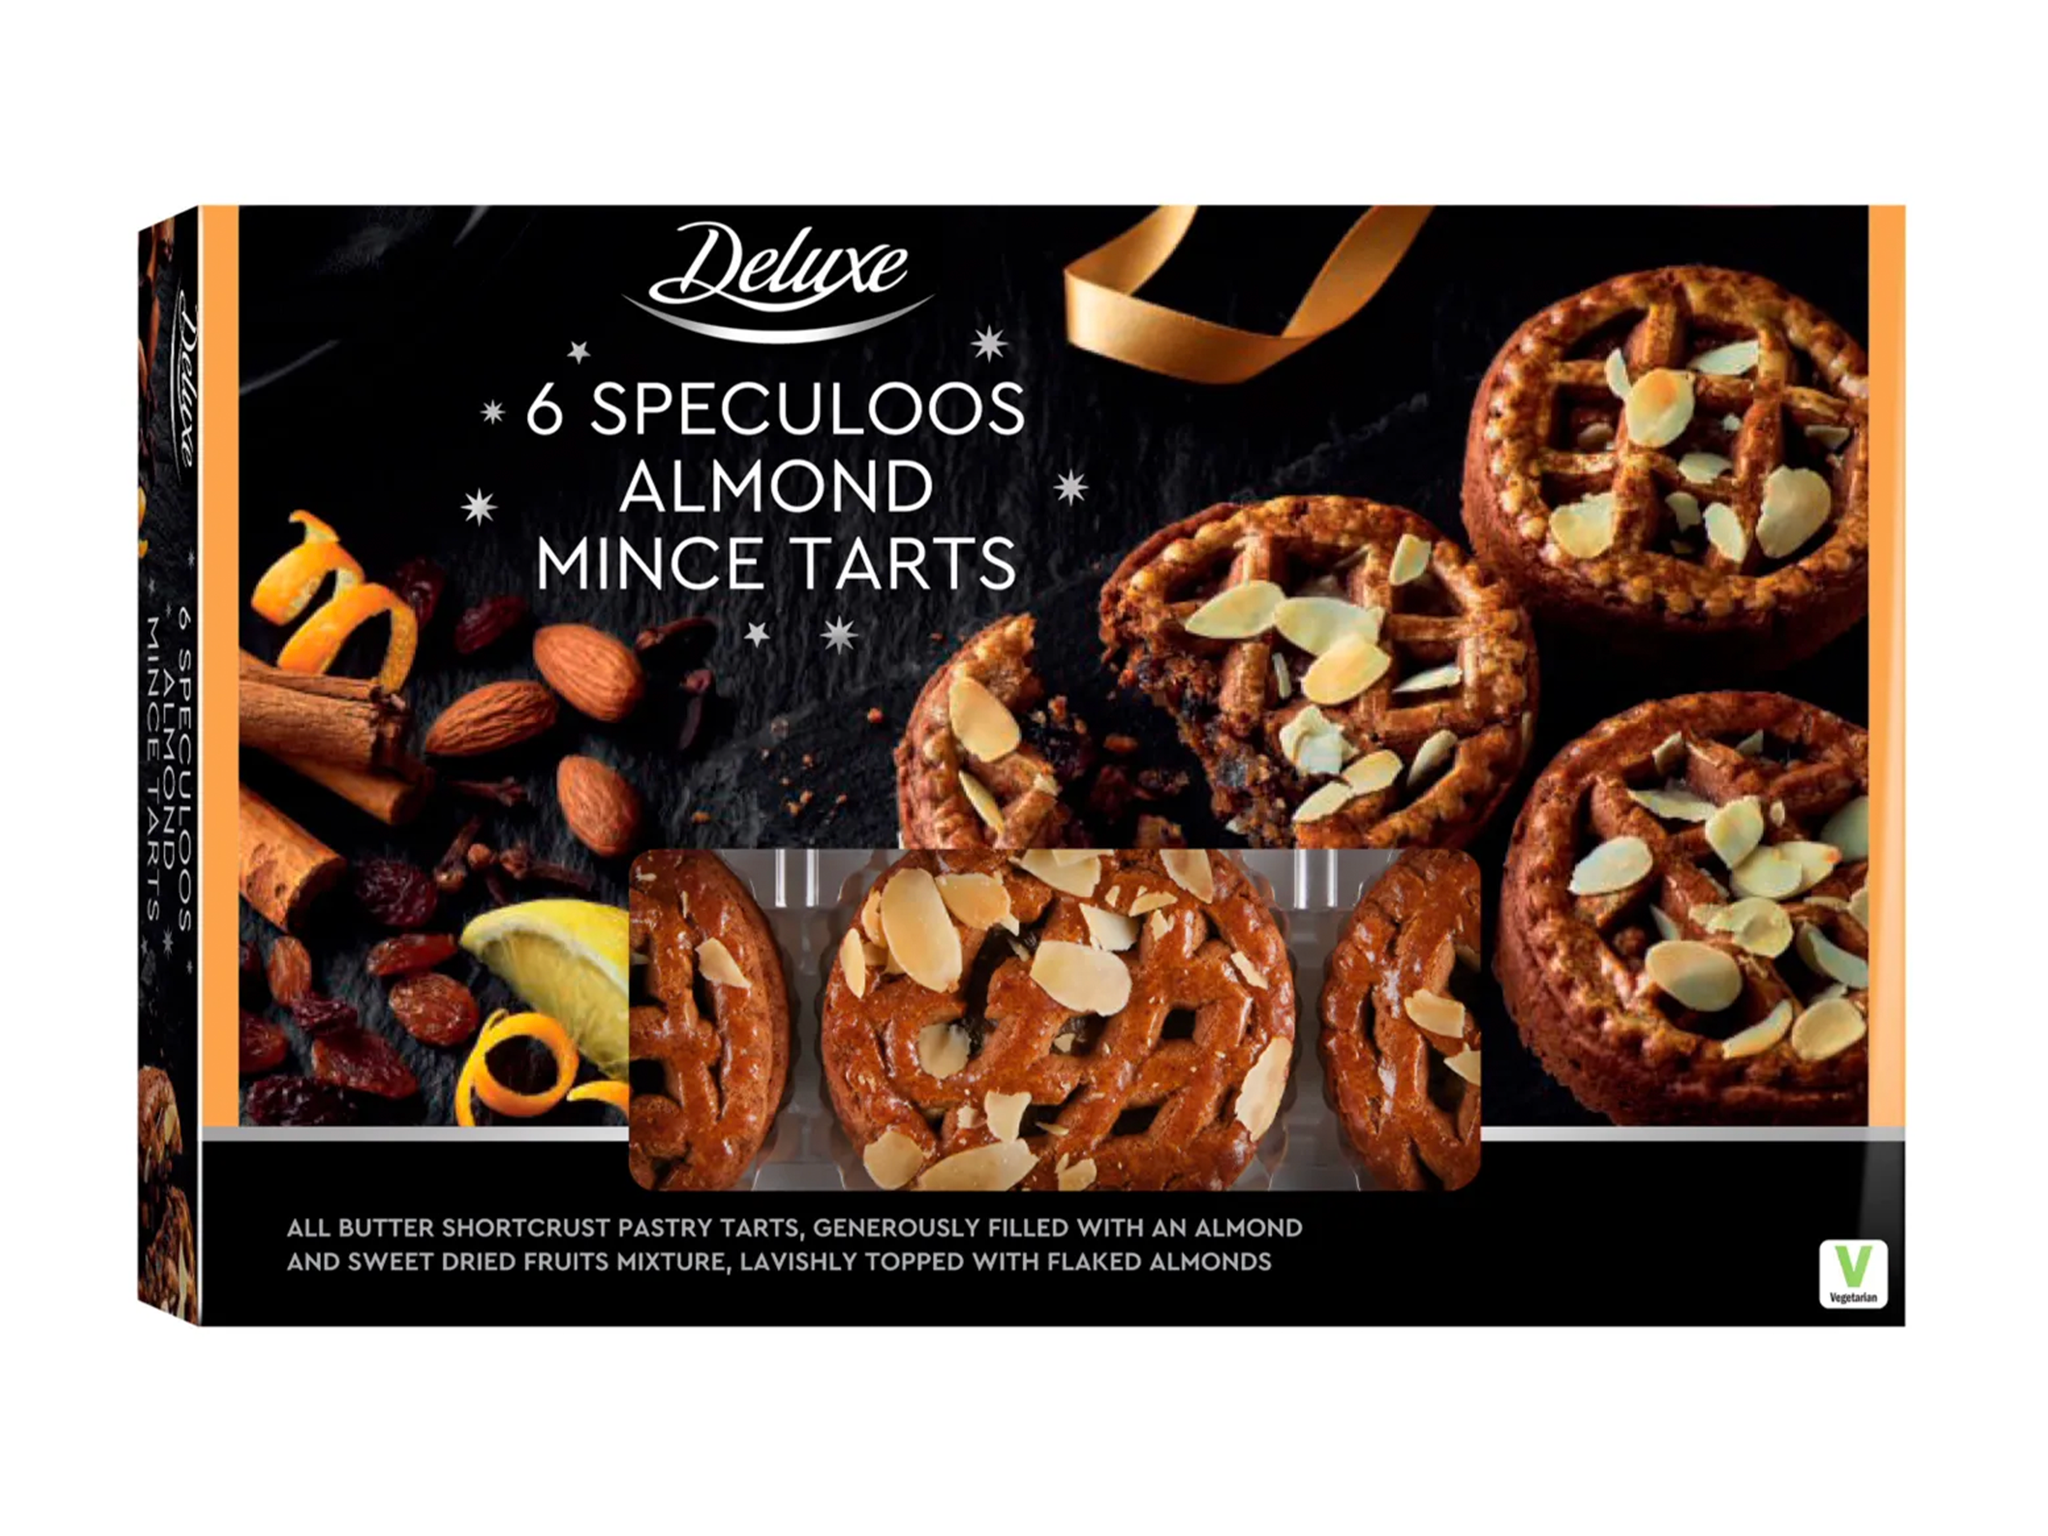 best mince pies Lidl 6 speculoos almond mince tarts